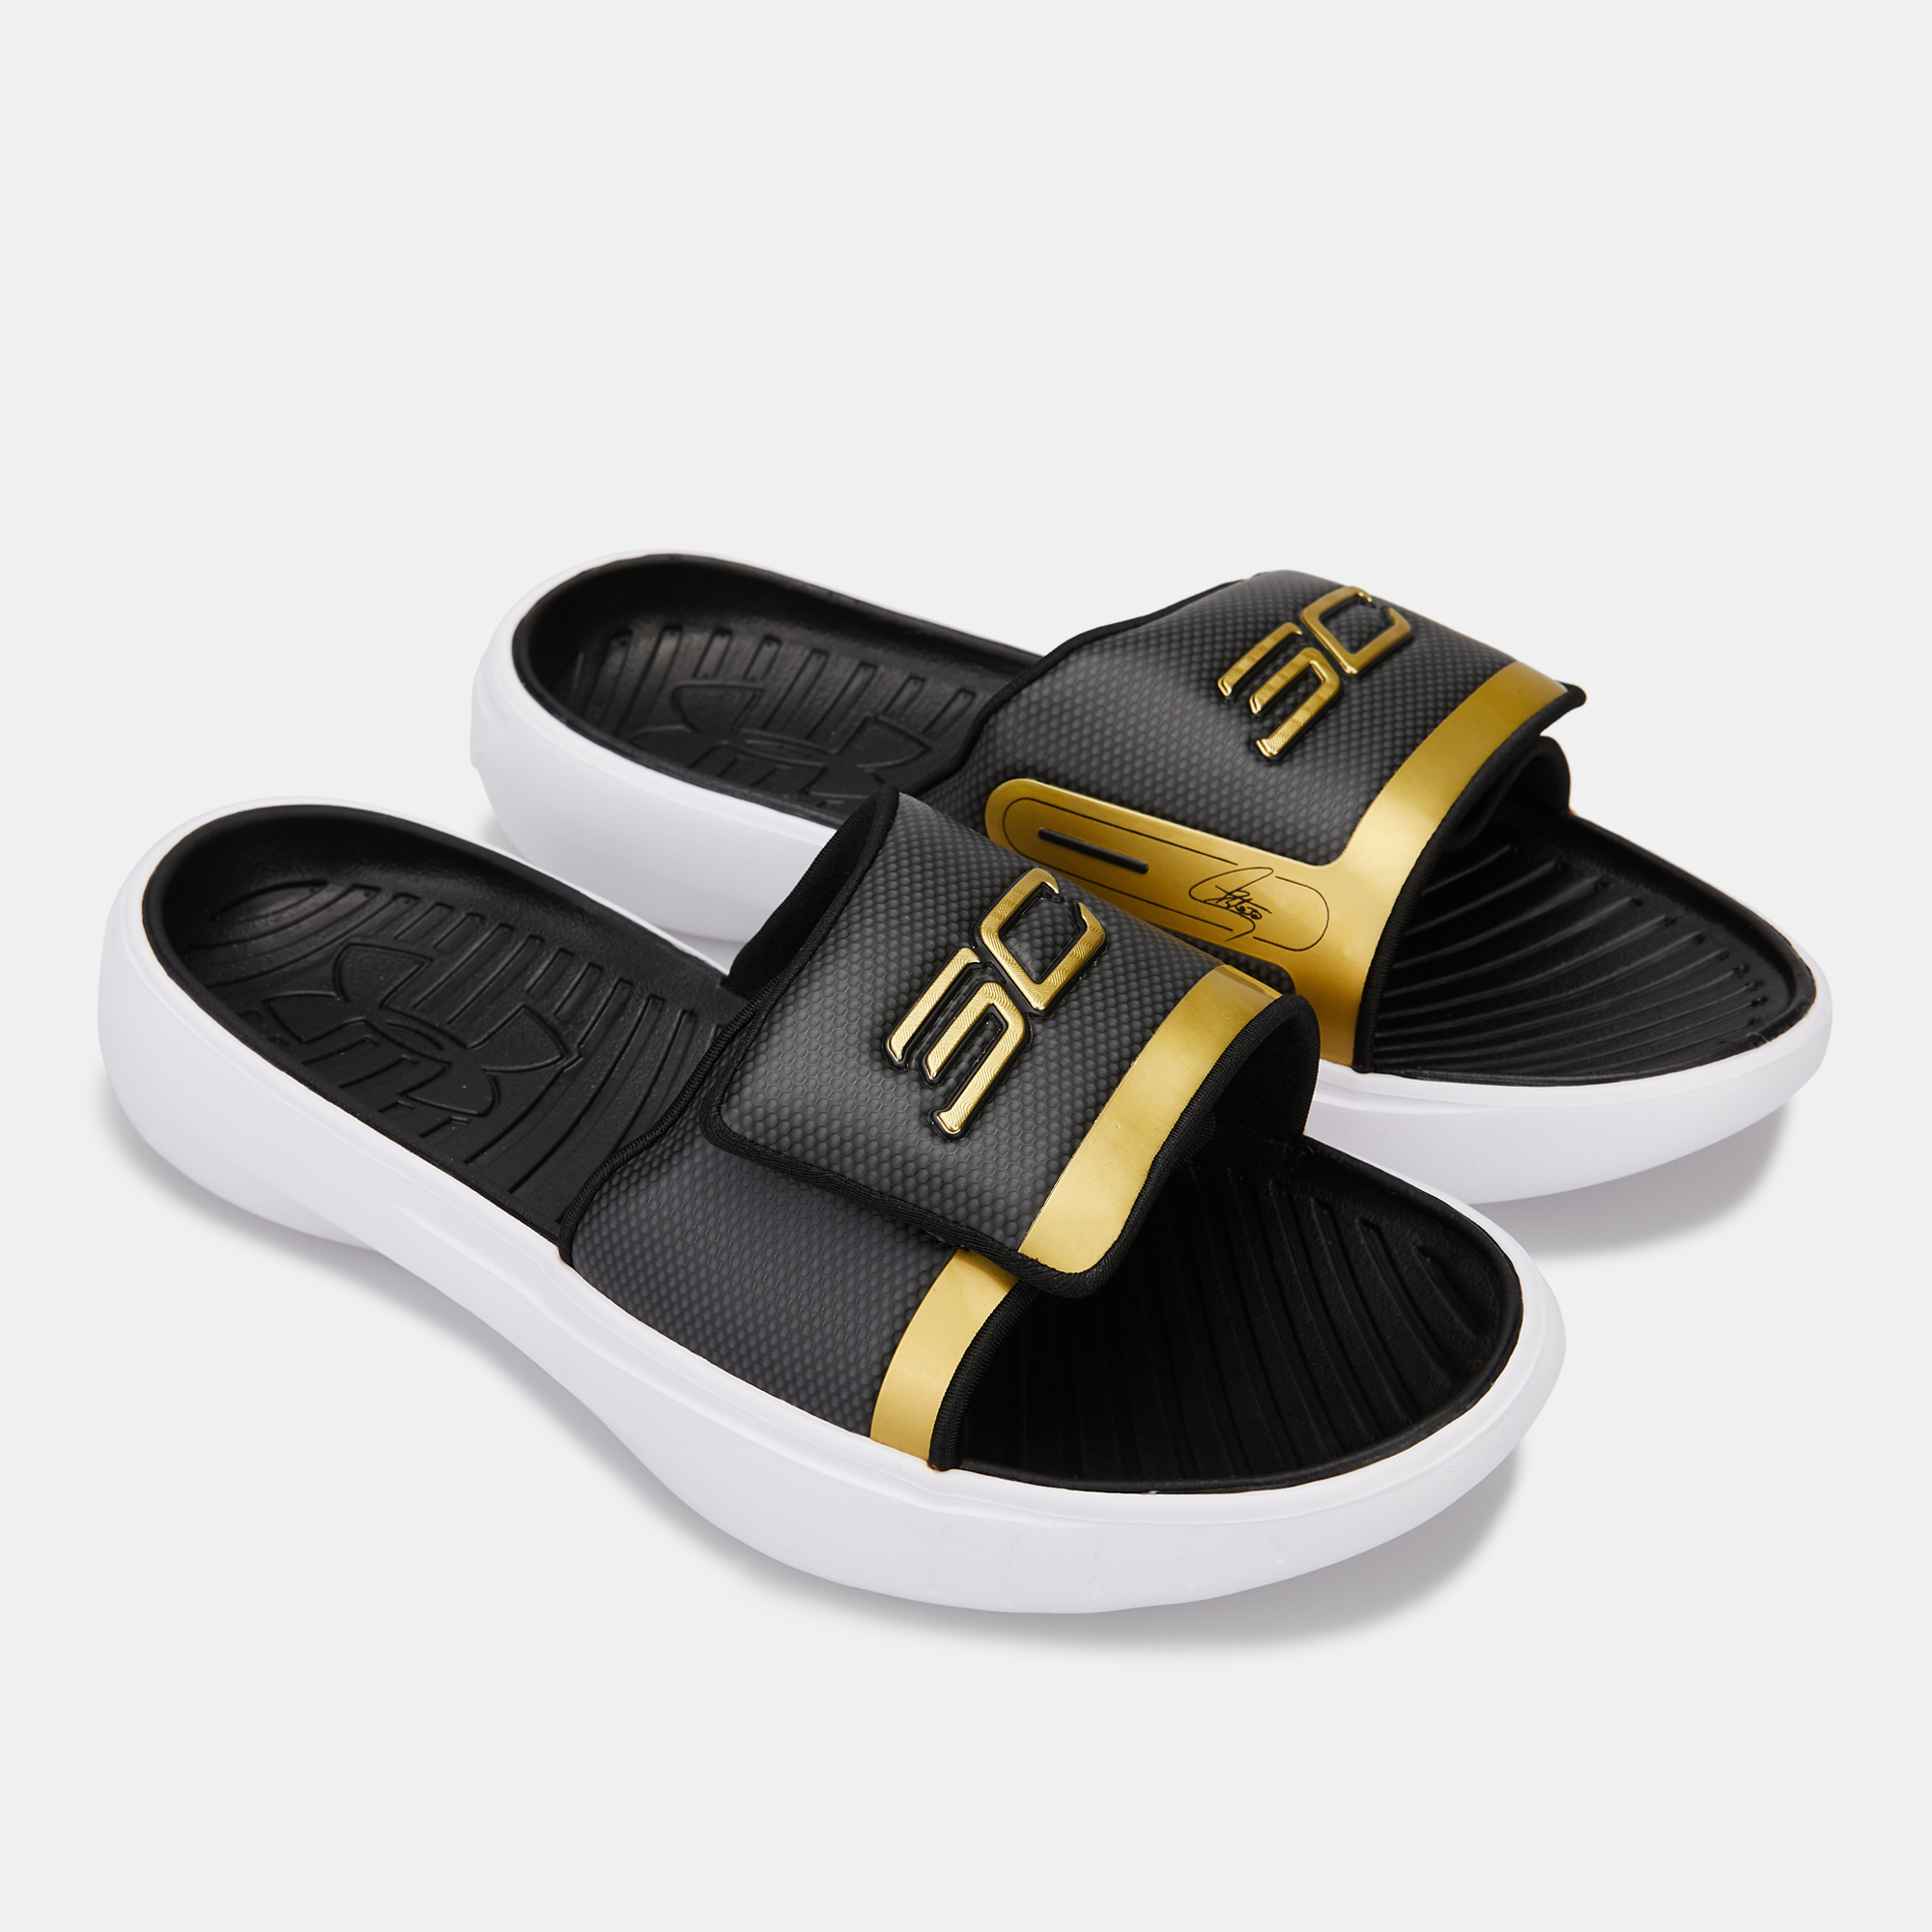 stephen curry slippers Shop Clothing 